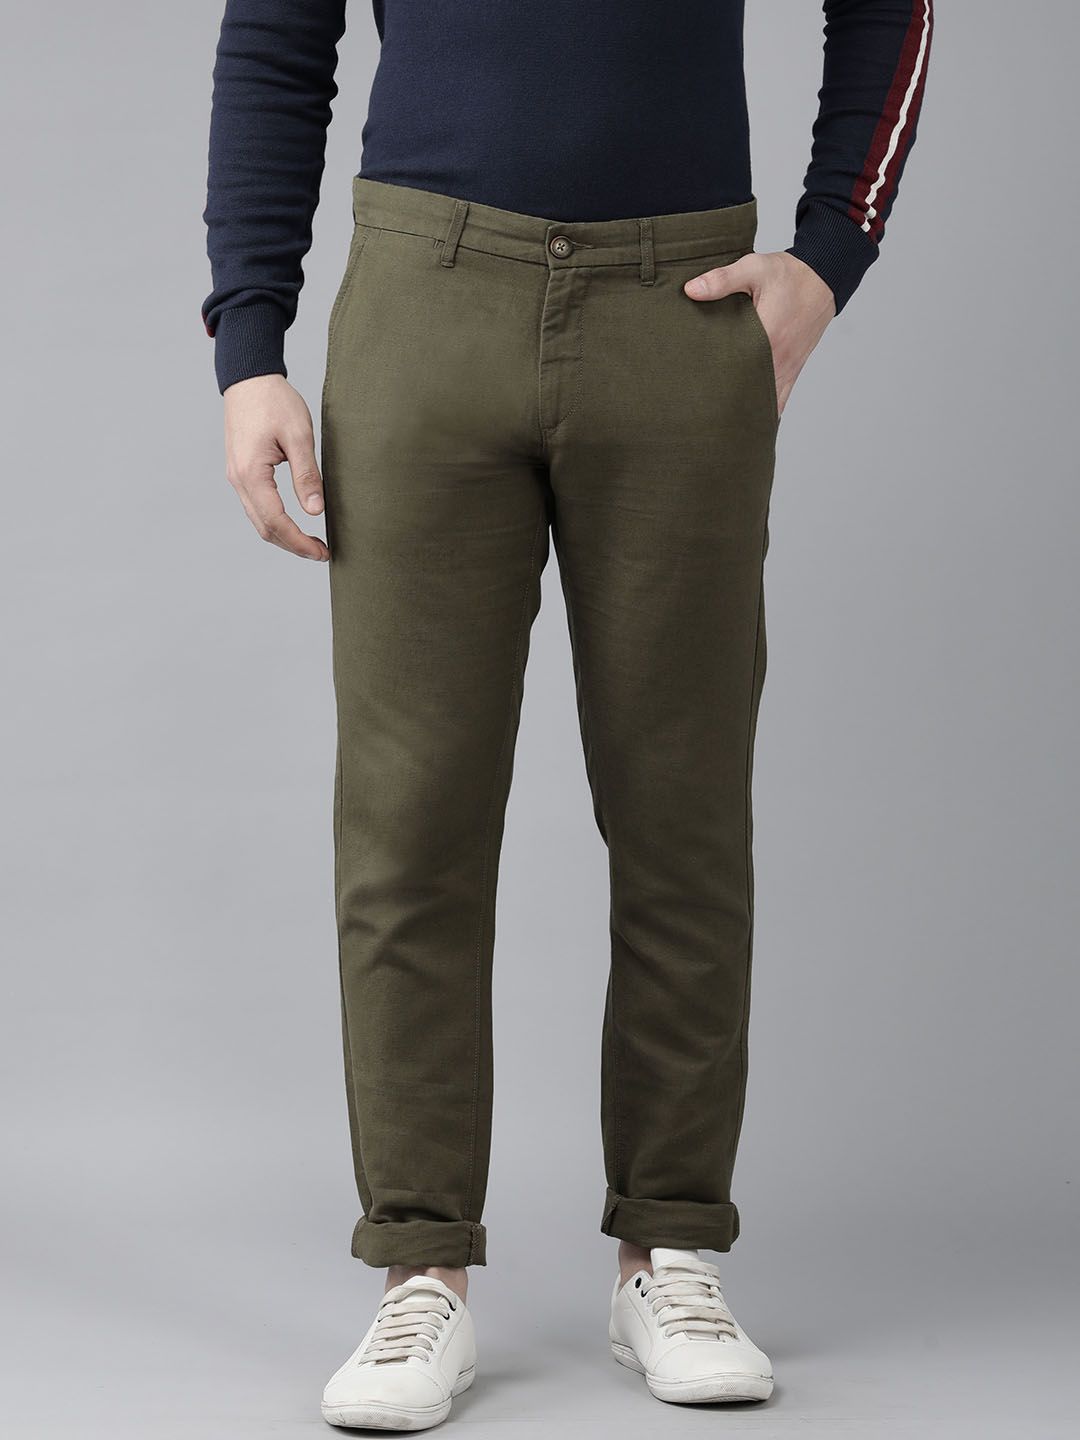 Buy US Polo Assn Men Solid Slim Fit Formal Trouser  Cream Online at Low  Prices in India  Paytmmallcom